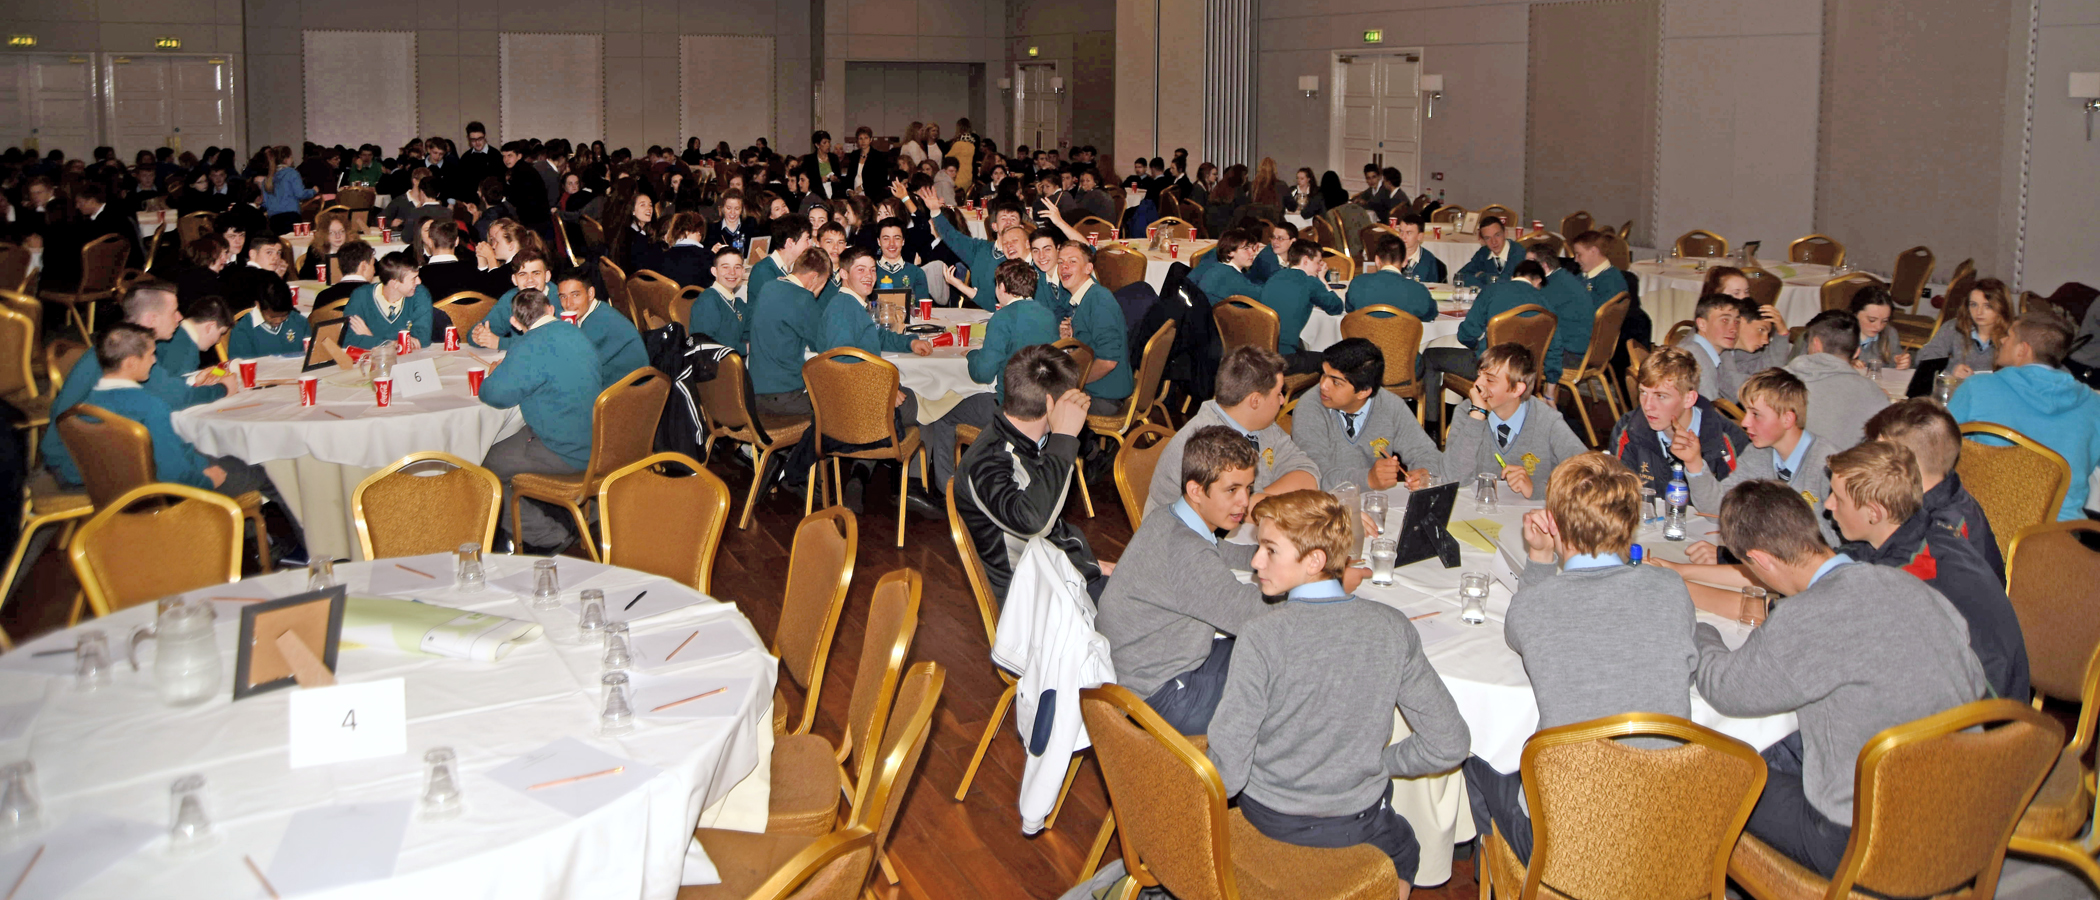 Over 300 North Cork students brainstorm at special event in Charleville